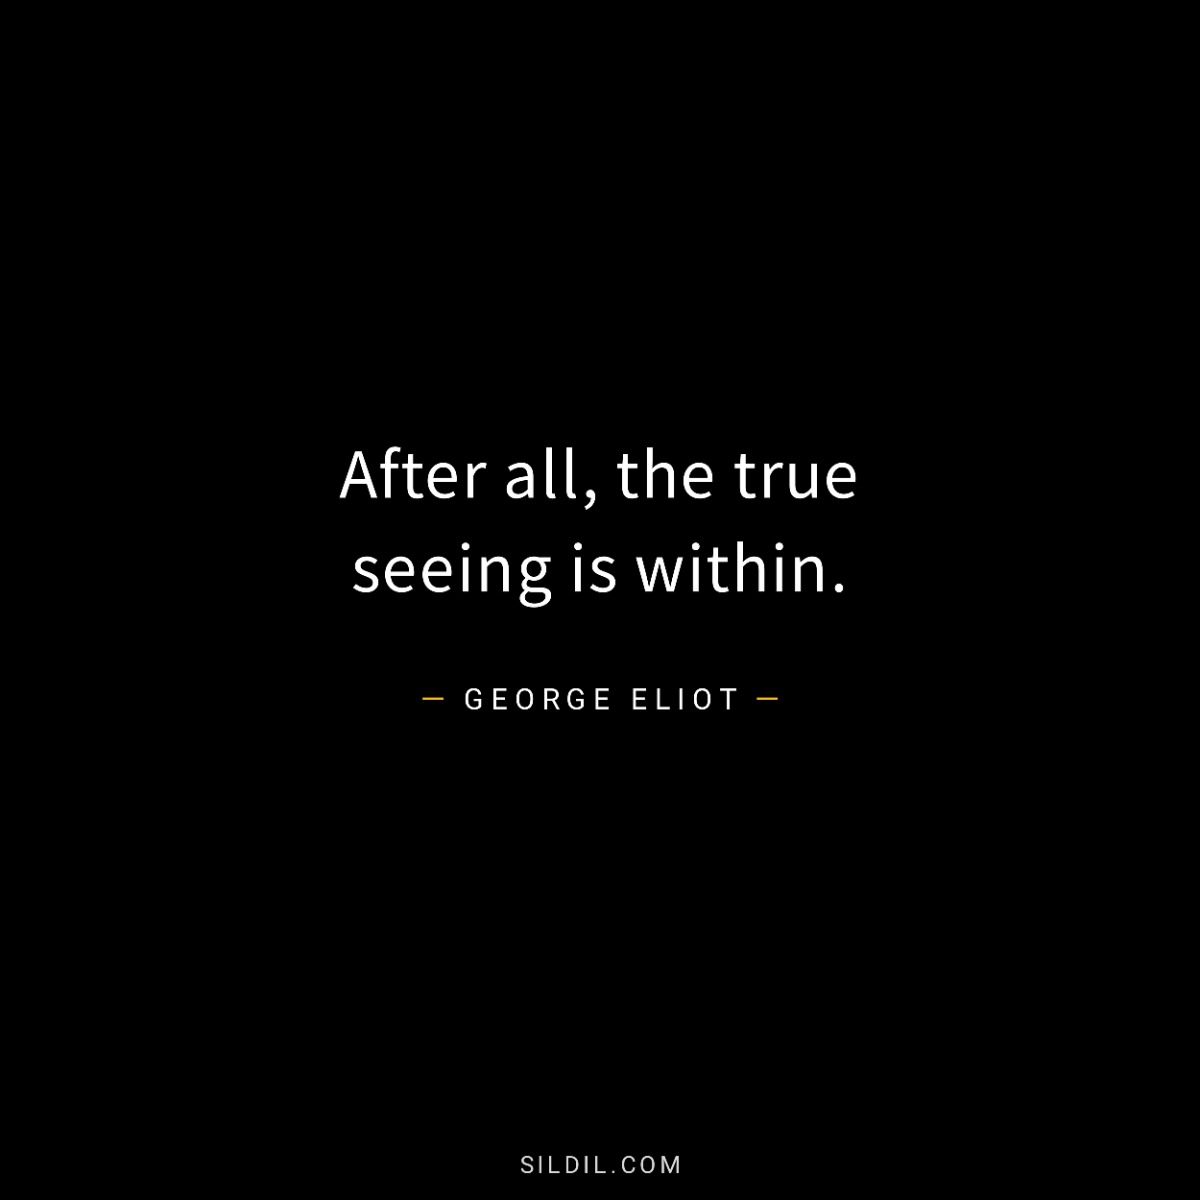 After all, the true seeing is within.